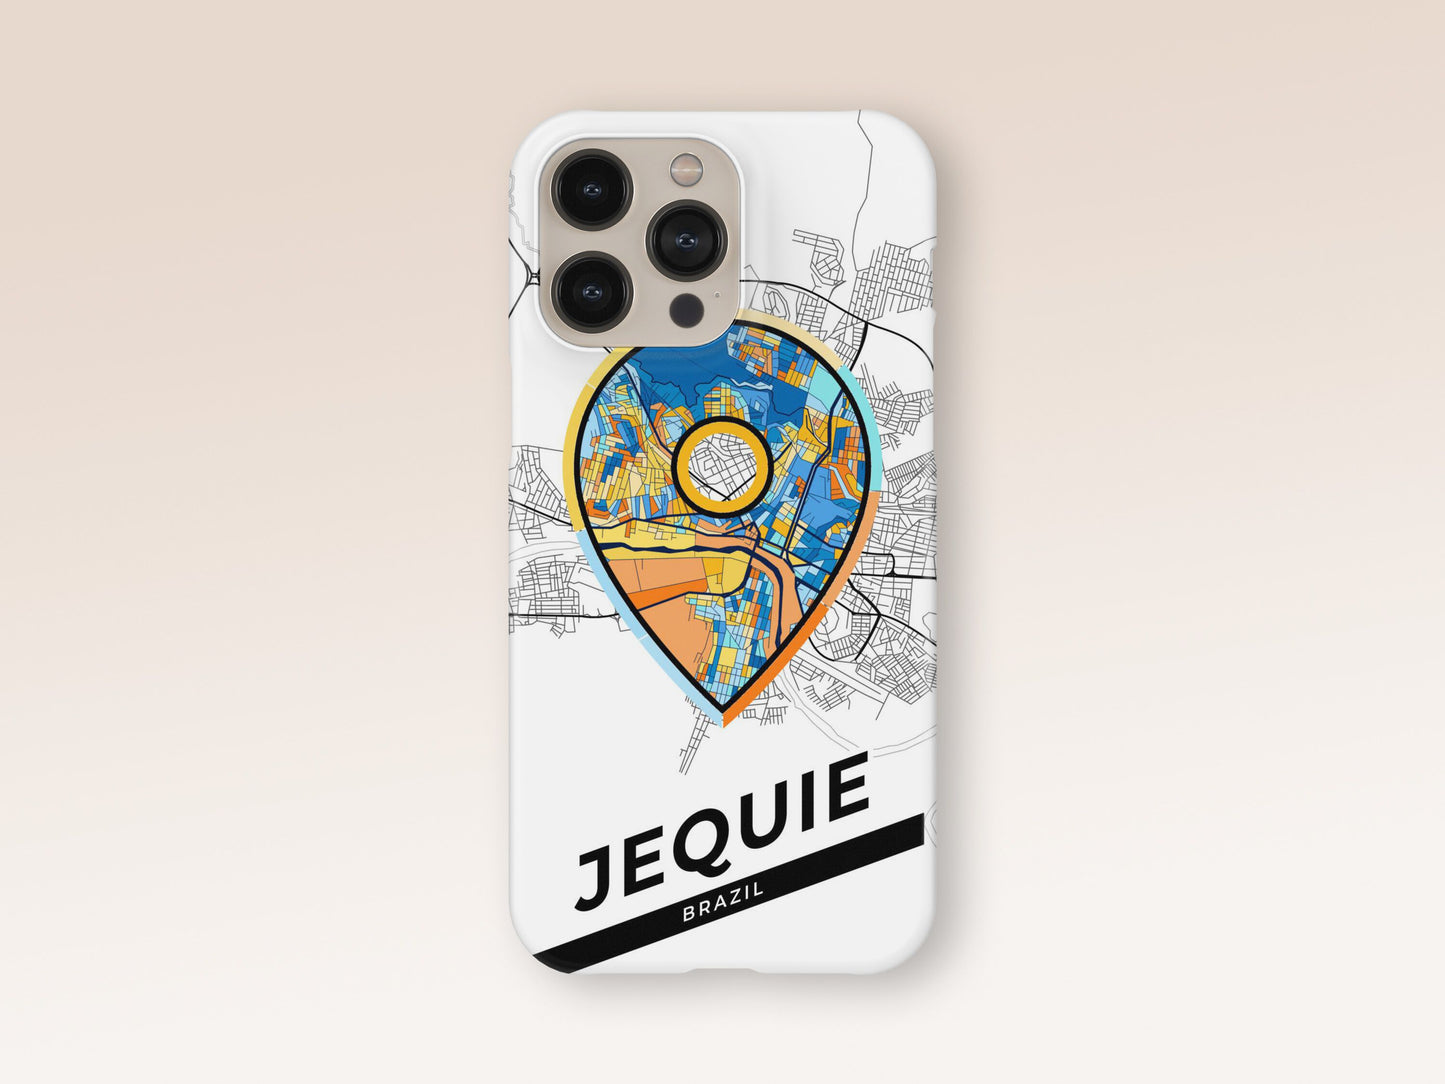 Jequie Brazil slim phone case with colorful icon. Birthday, wedding or housewarming gift. Couple match cases. 1